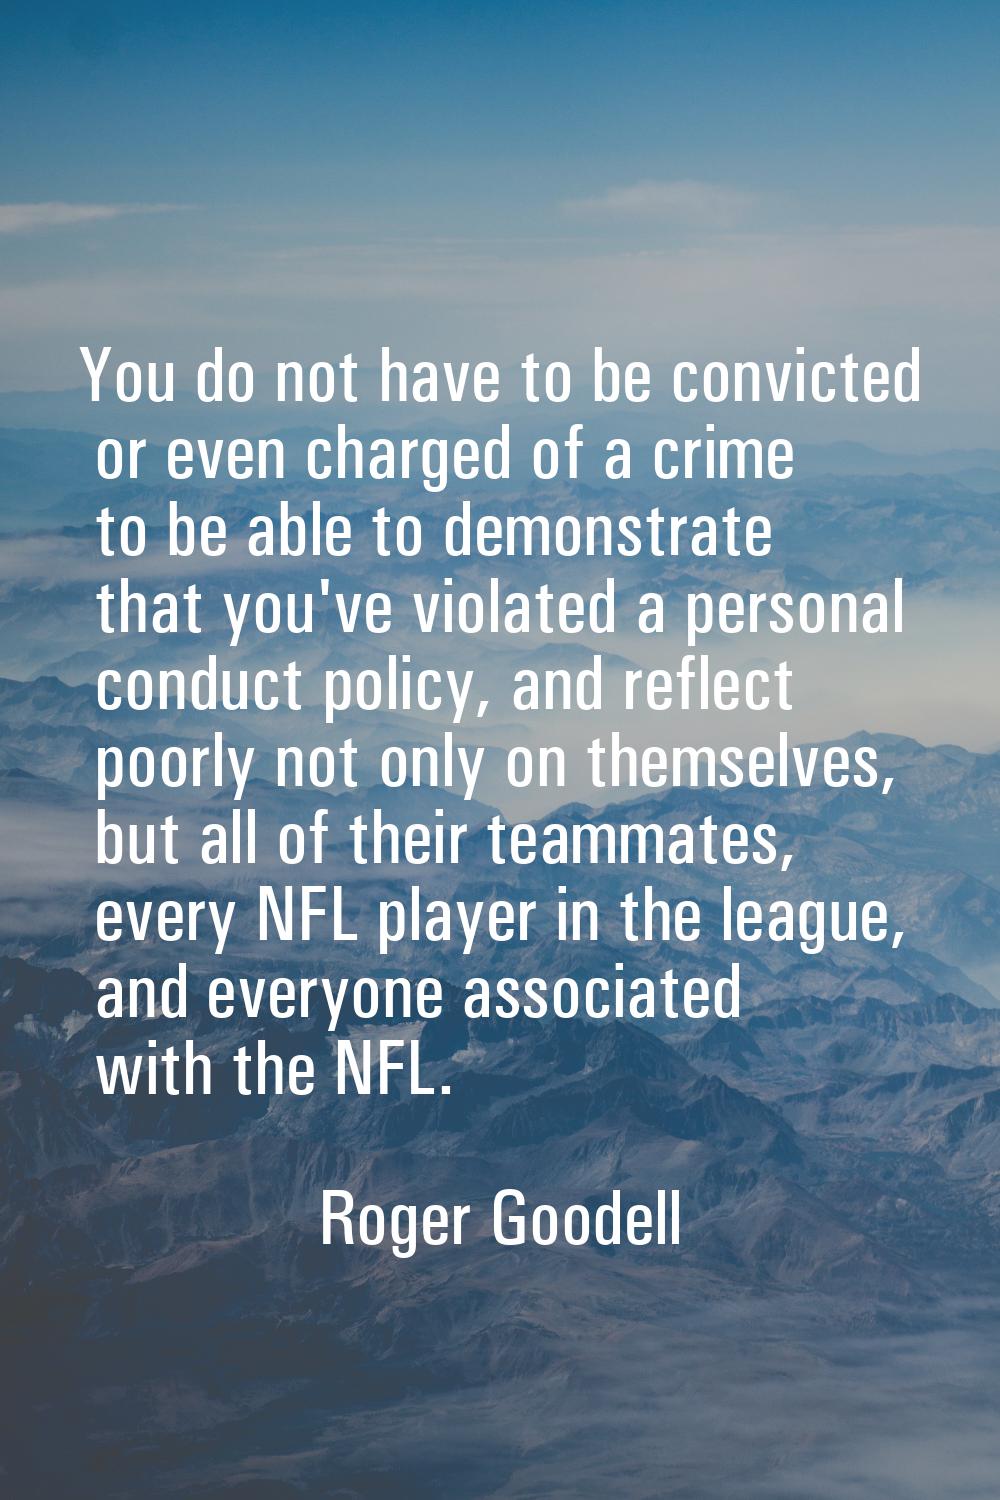 You do not have to be convicted or even charged of a crime to be able to demonstrate that you've vi